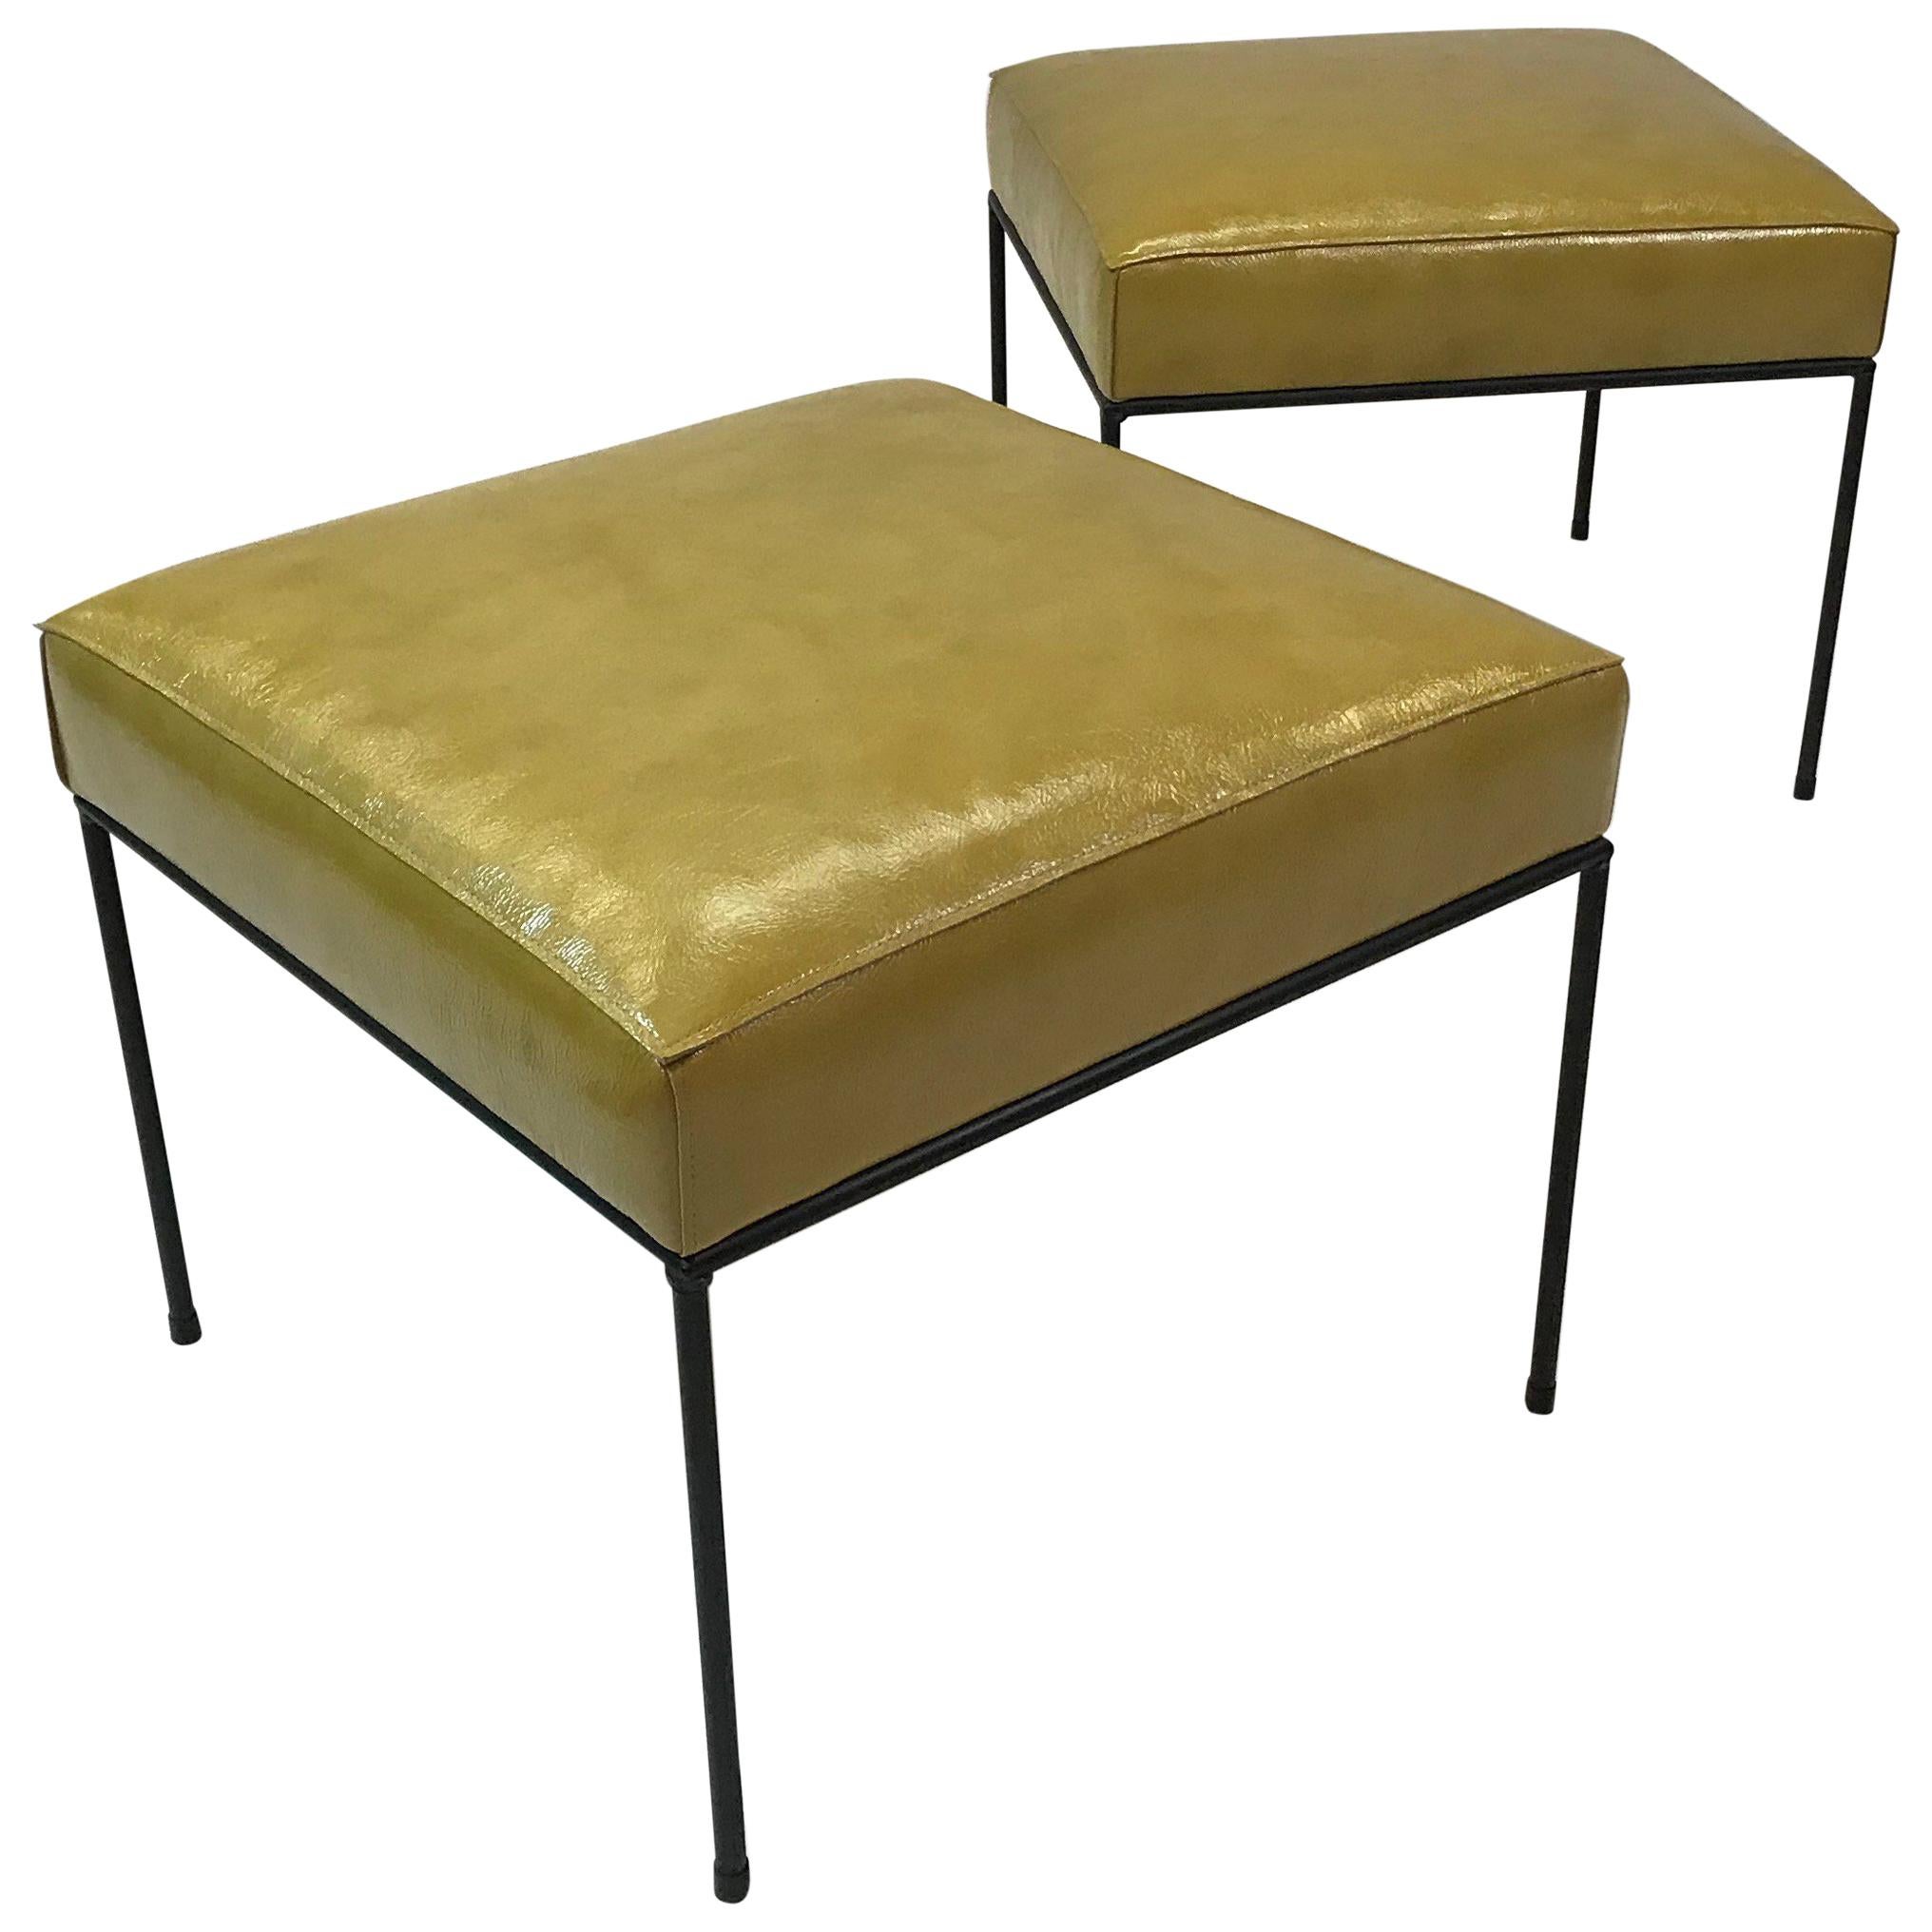 Pair of Leather and Wrought Iron Paul McCobb Square Ottomans